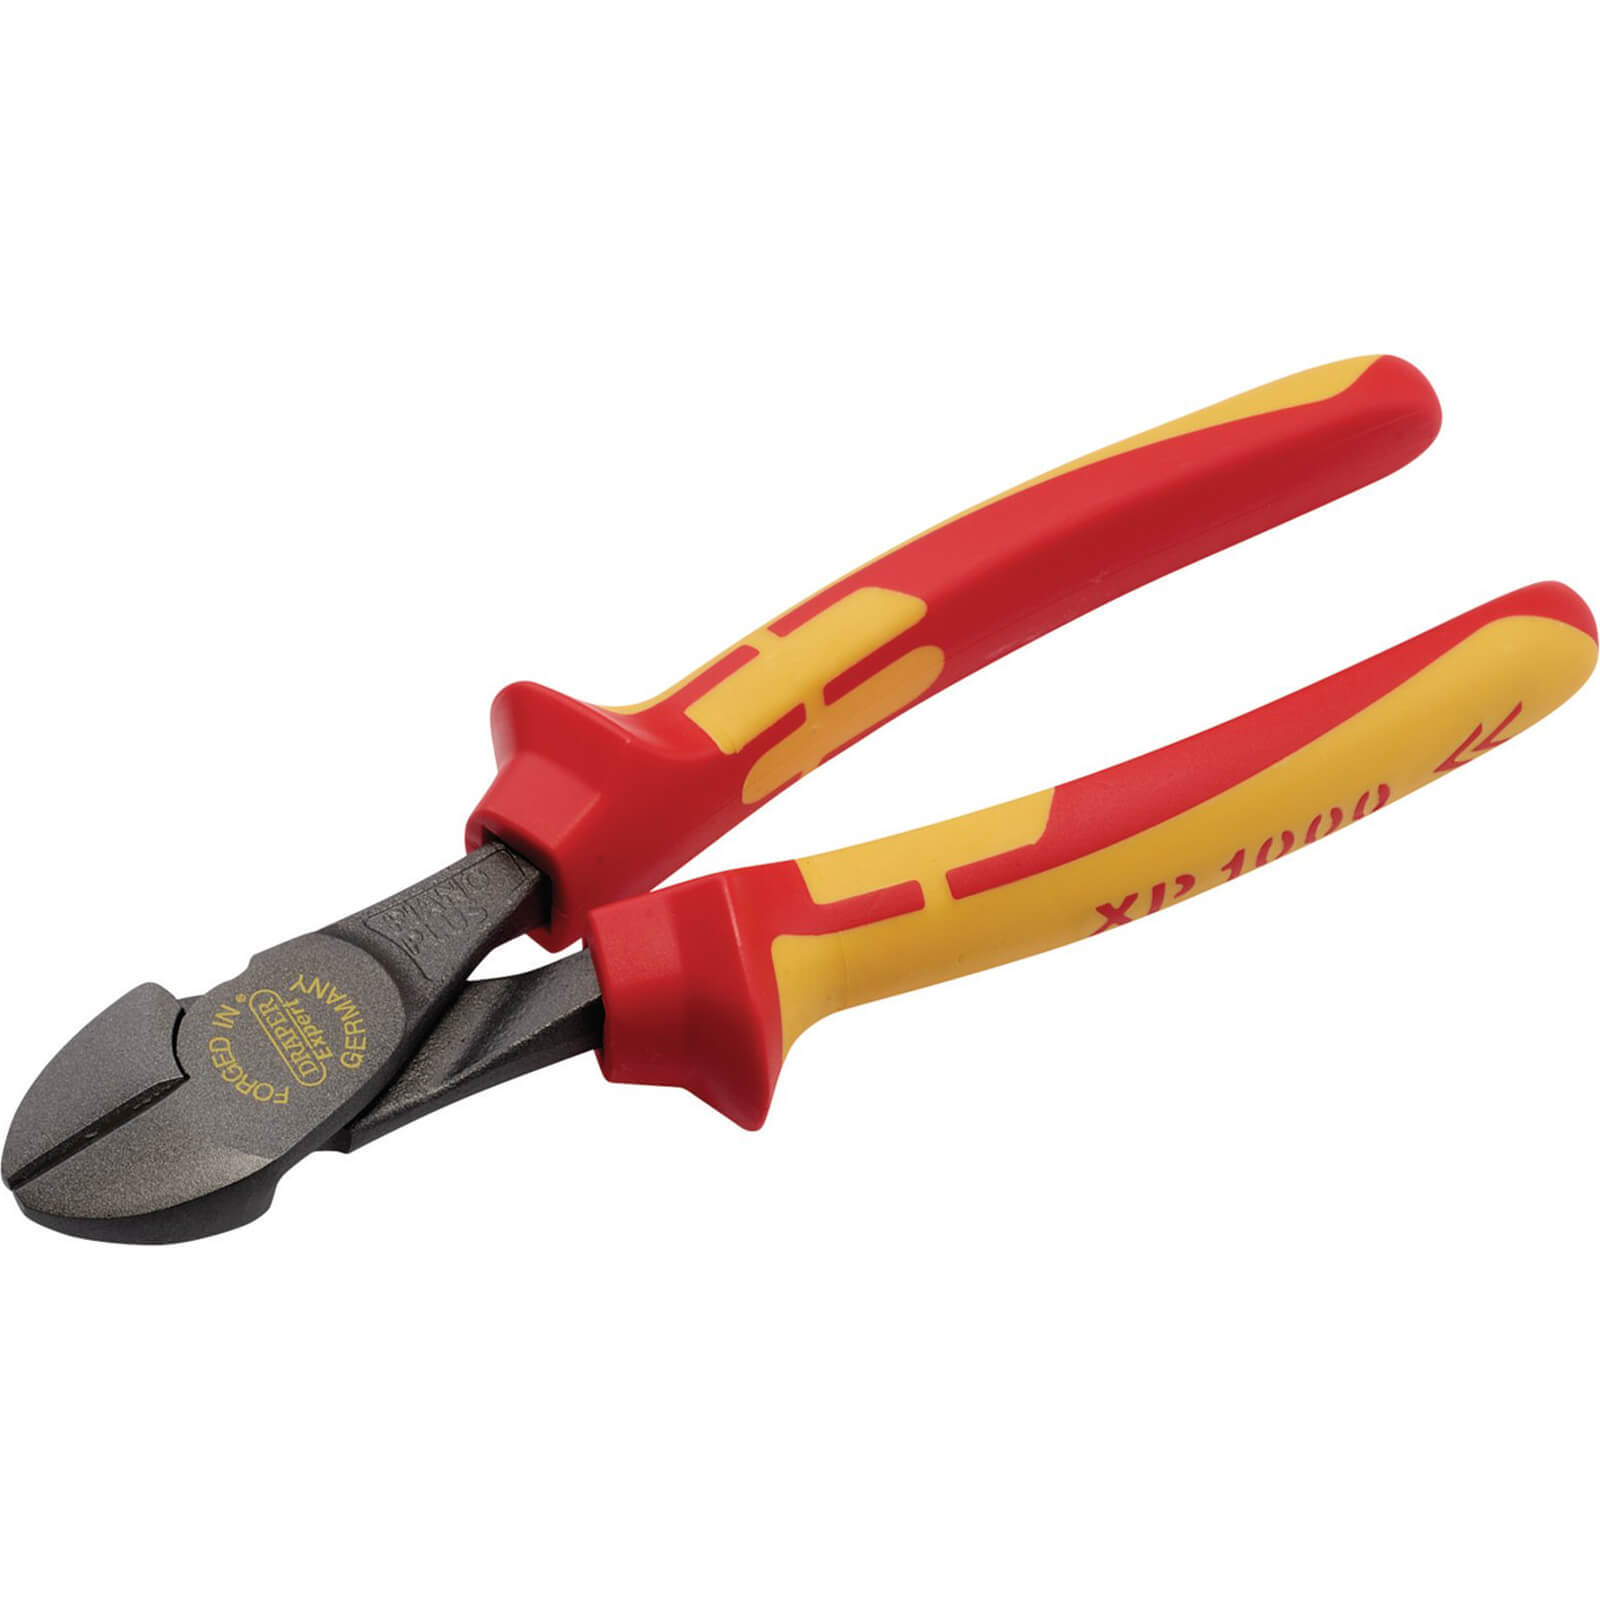 Draper XP1000 VDE Insulated High Leverage Side Cutters 200mm